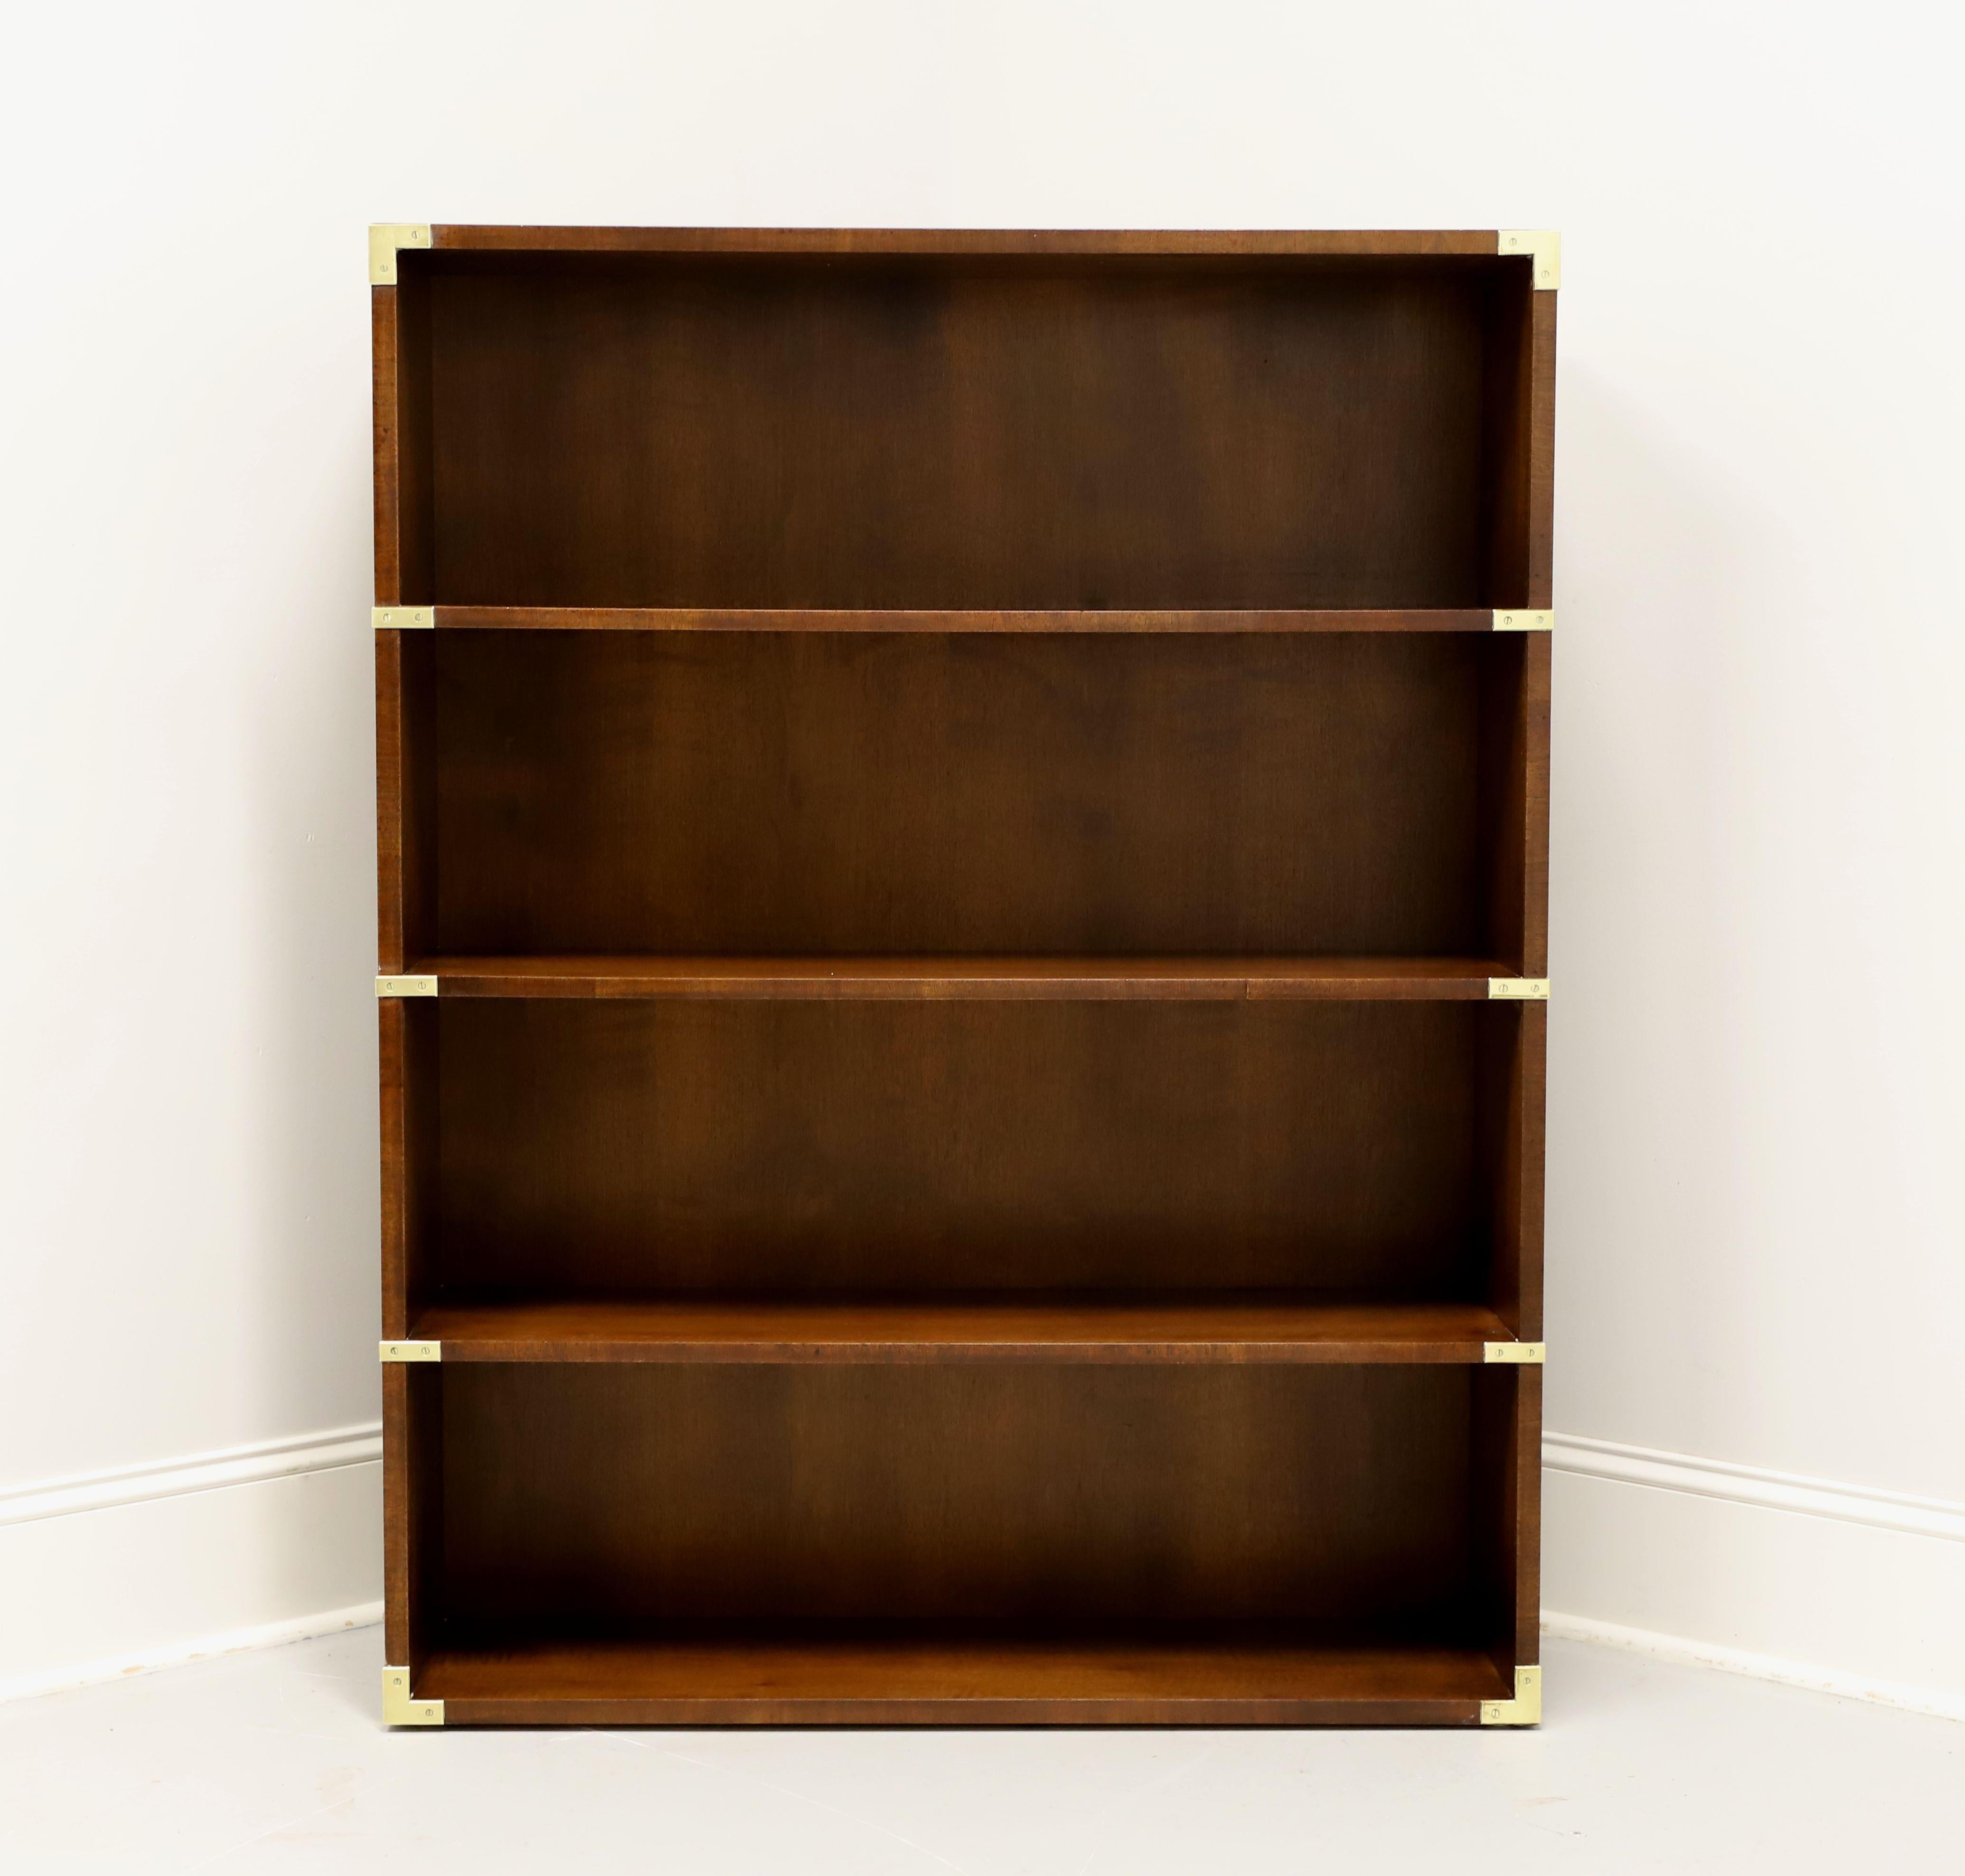 A campaign style open bookcase by Henredon. Walnut with a slightly distressed finish, brass accents, smooth edge to top, and a flat base. Features four fixed shelves with eleven and half inches of height between them. Made in Morganton, North